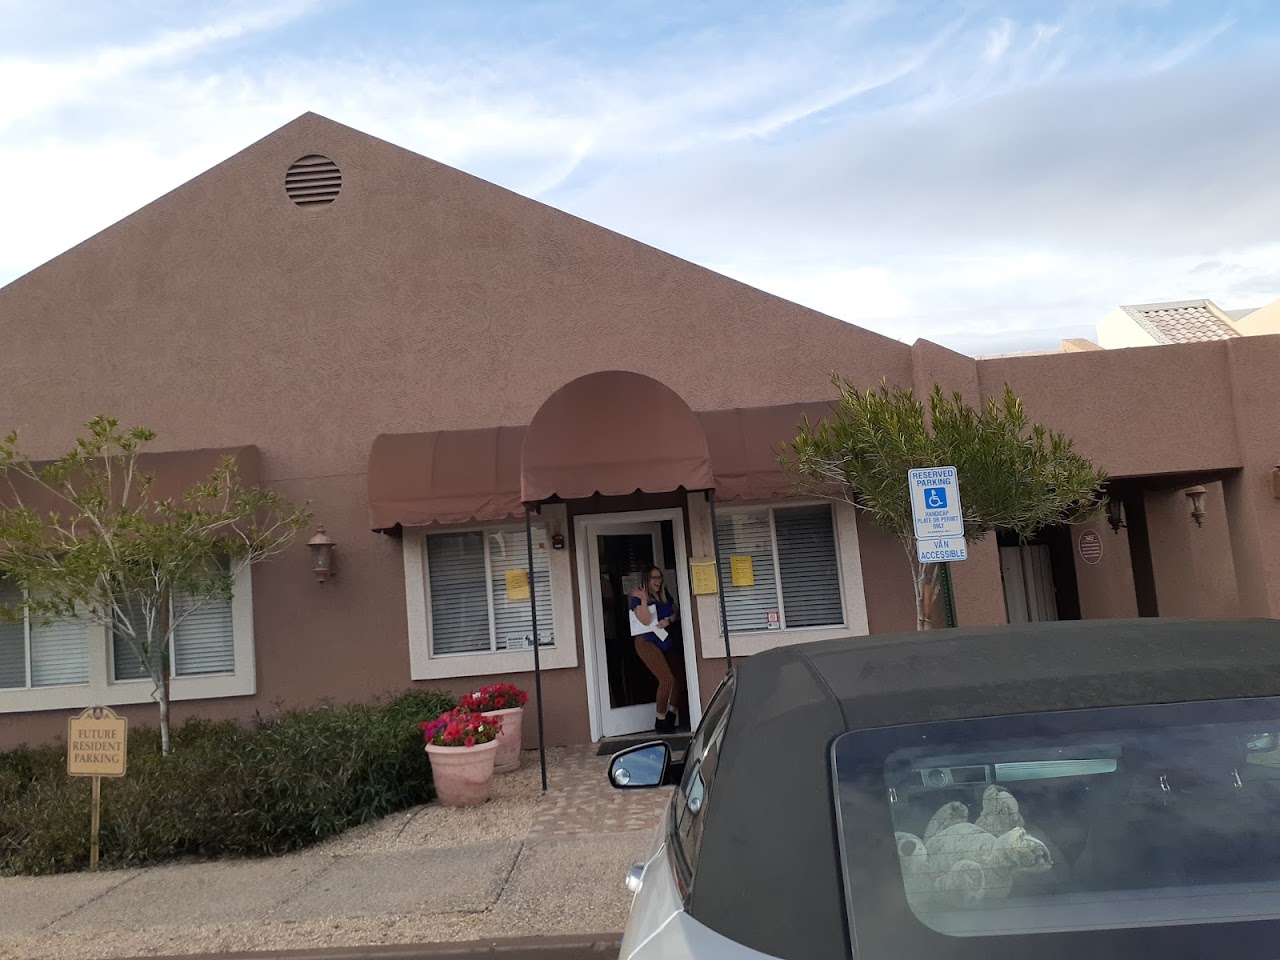 Photo of GALLERIA APTS II. Affordable housing located at 10854 N 60TH AVE GLENDALE, AZ 85304